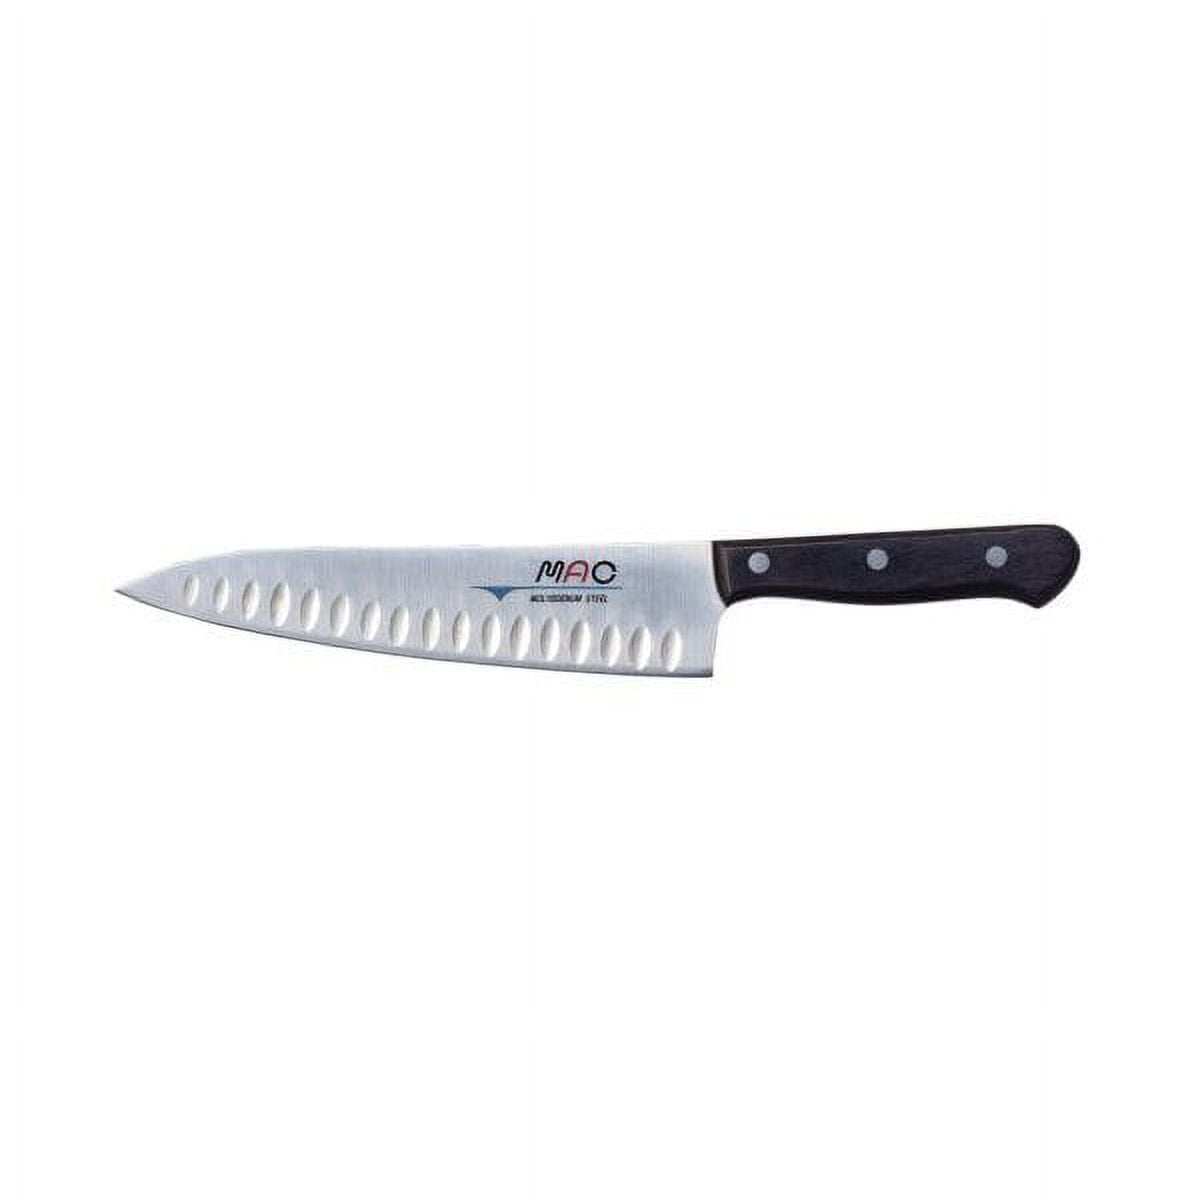 Mac Knife Series Hollow Edge Chef's Knife, 8-Inch, 8 Inch, Silver